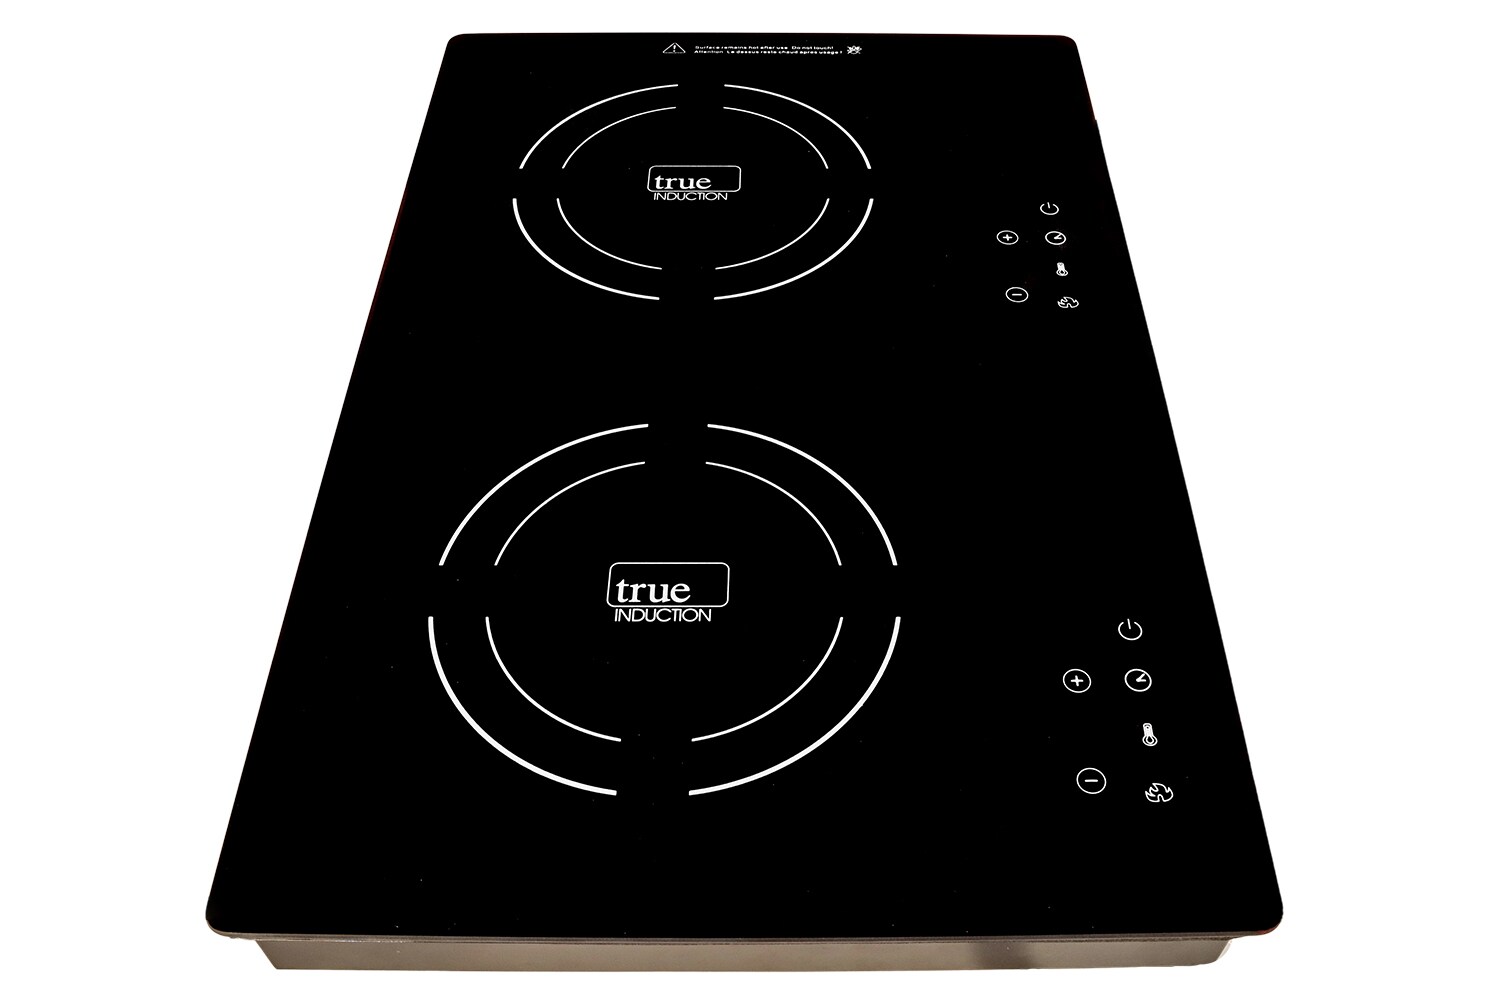 Cooktops at Lowe's